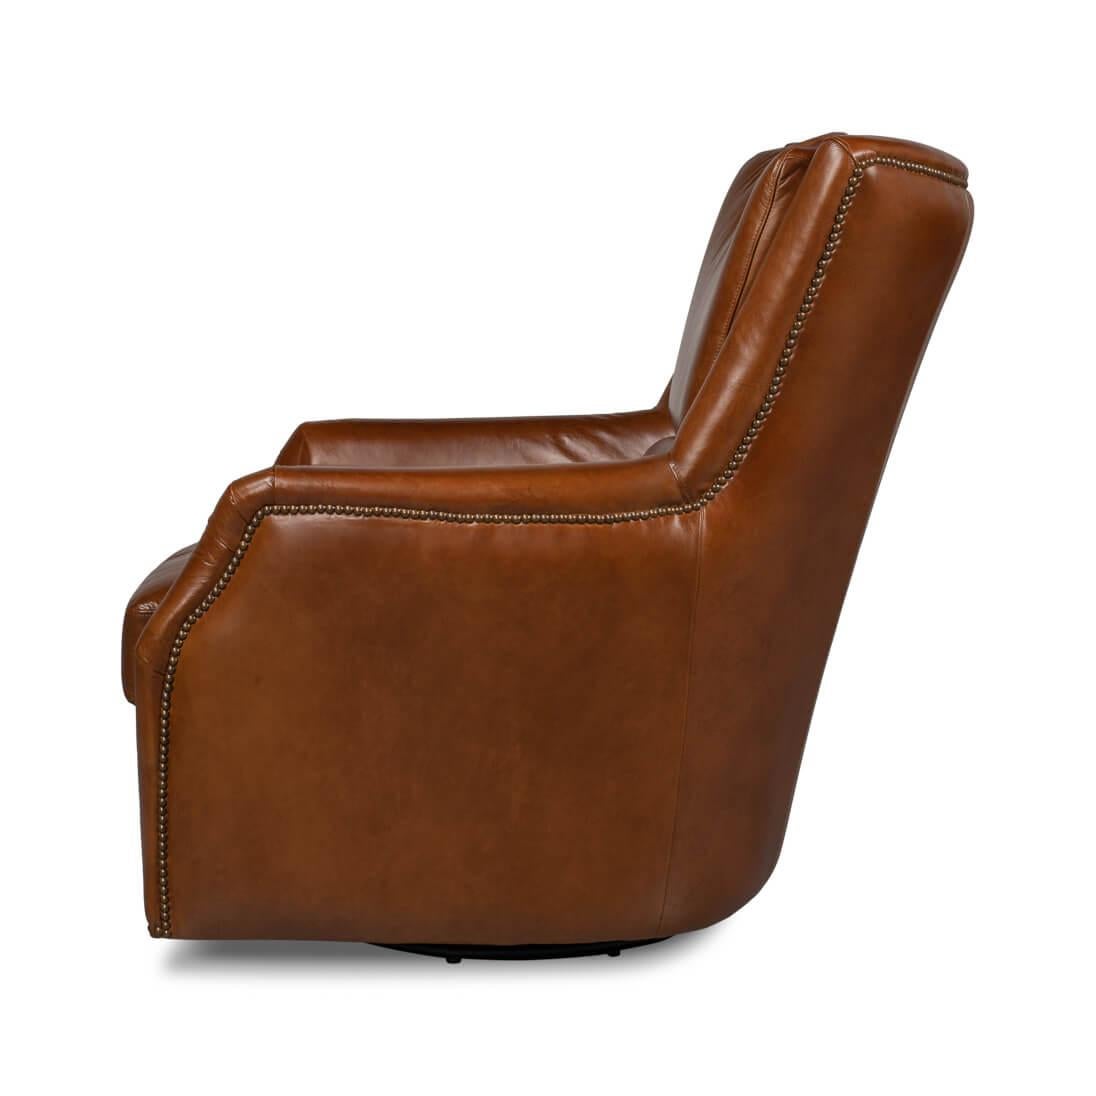 traditional swivel chairs